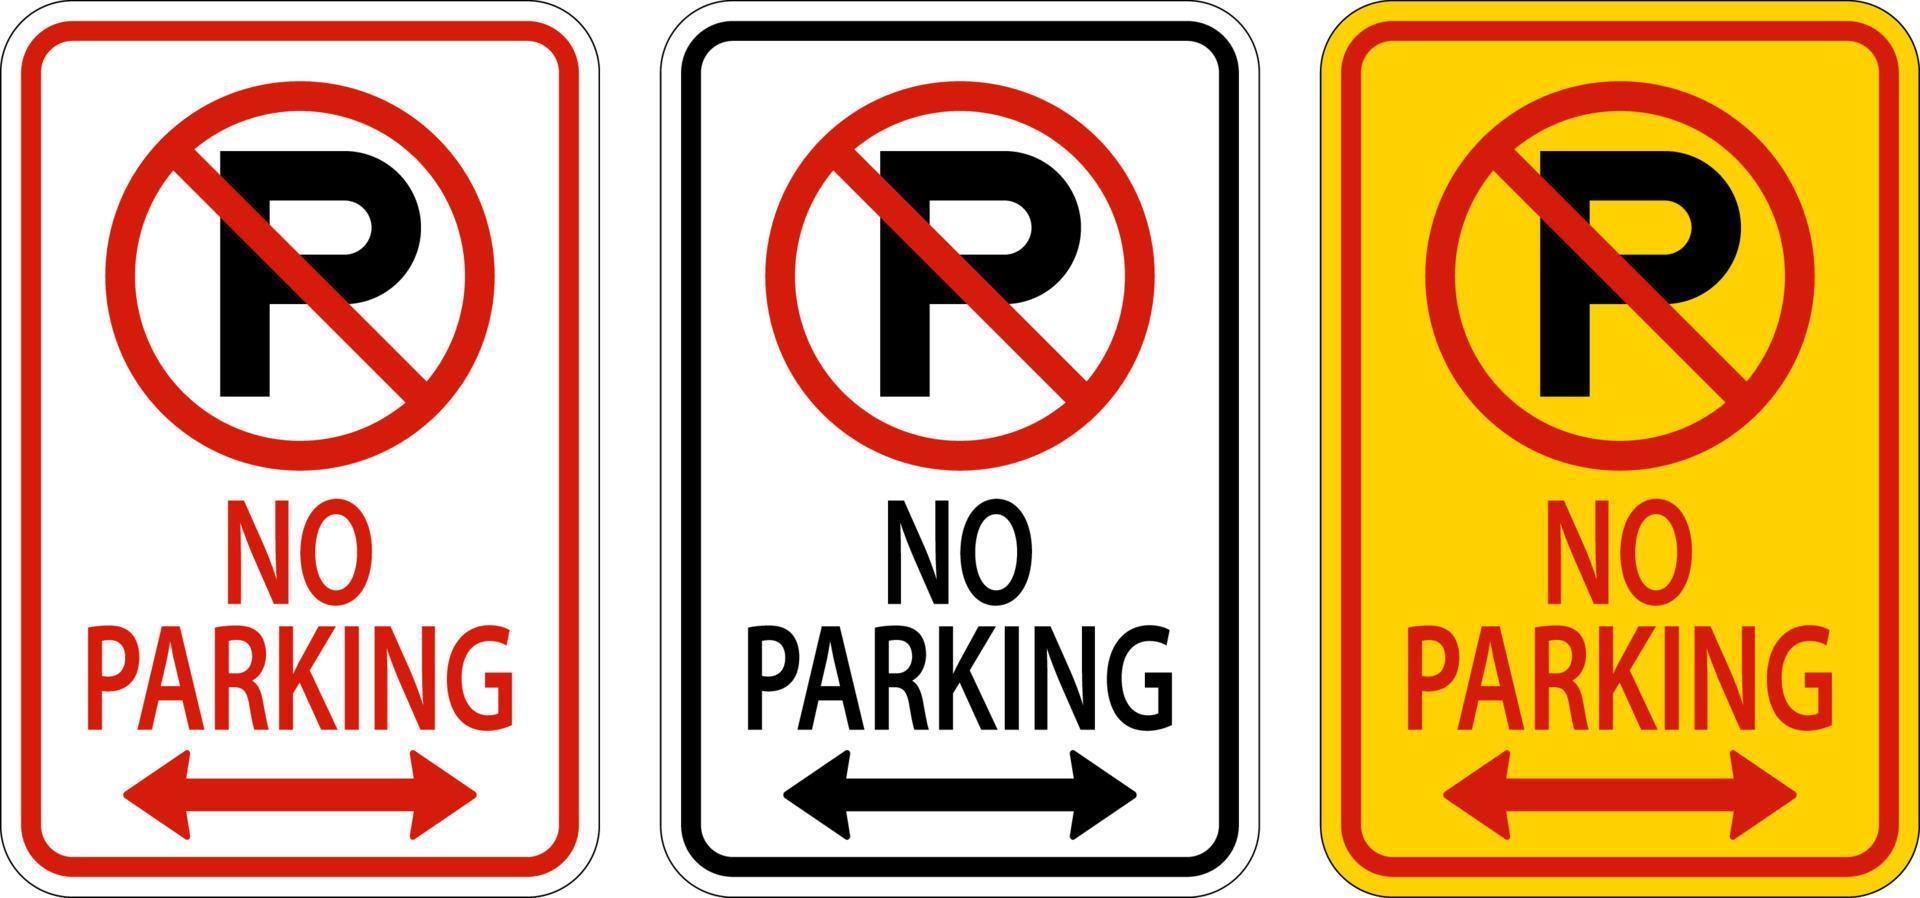 No Parking Double Arrow Sign On White Background vector